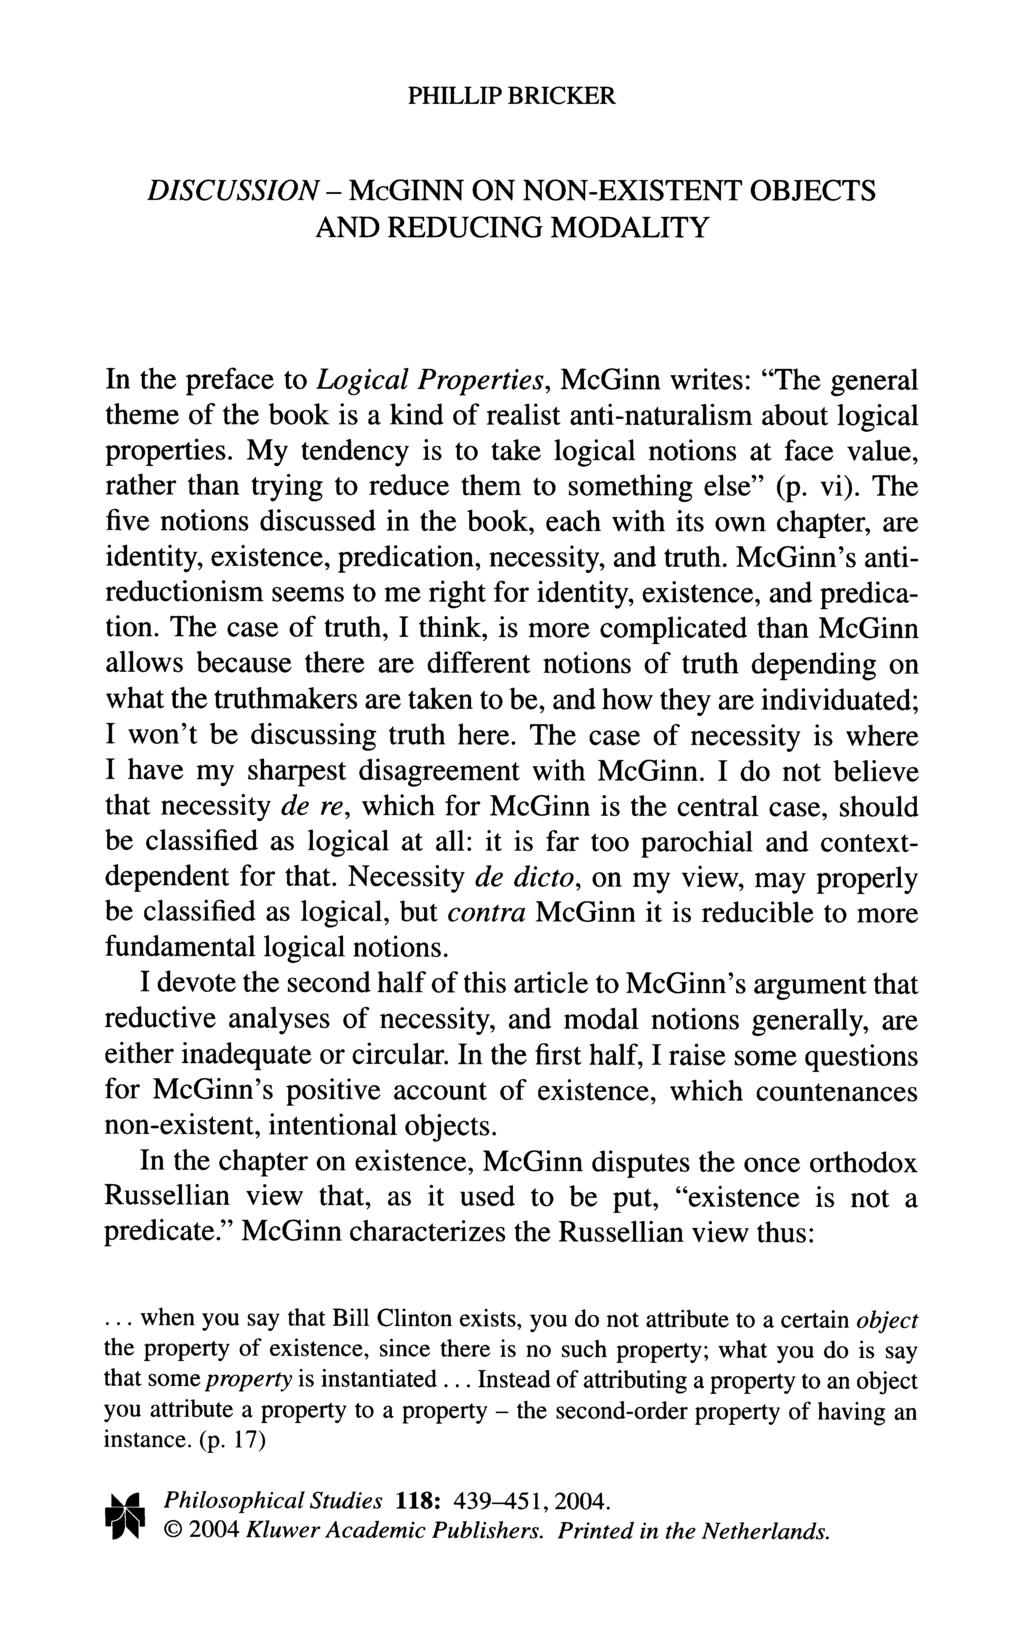 PHILLIP BRICKER DISCUSSION - McGINN ON NON-EXISTENT OBJECTS AND REDUCING MODALITY In the preface to Logical Properties, McGinn writes: "The general theme of the book is a kind of realist